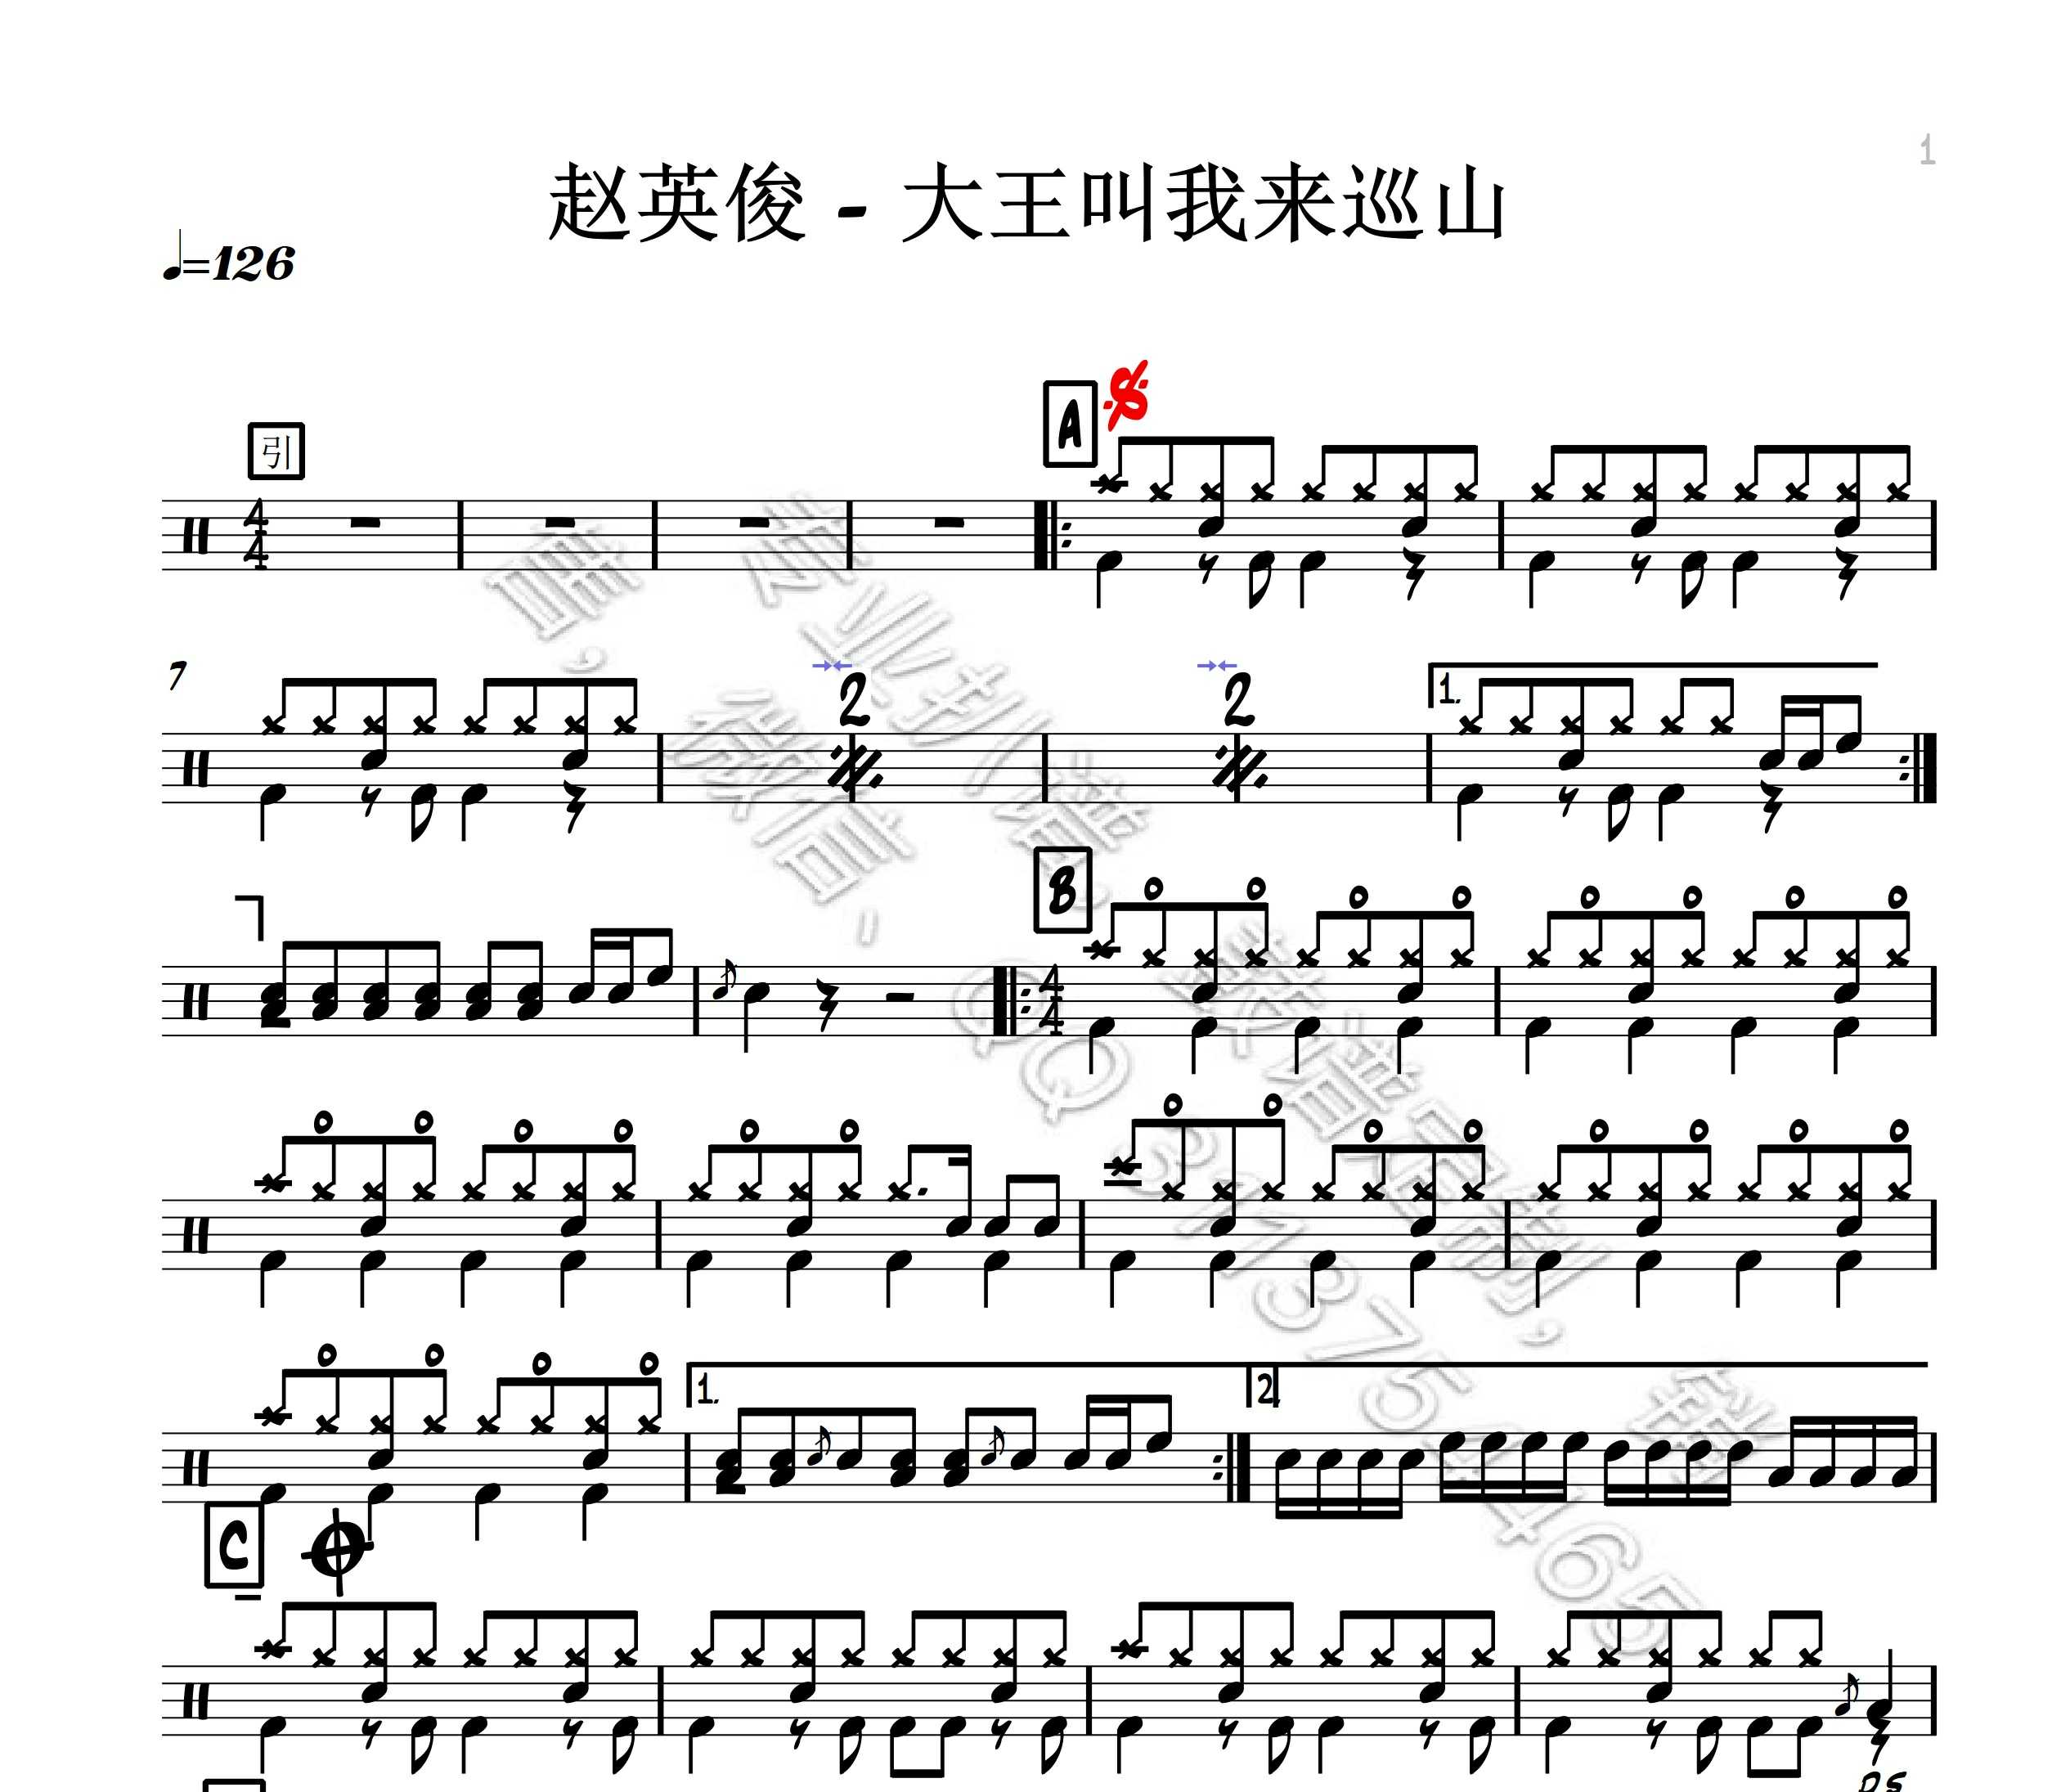 (05)Zhao Handsome-the king asked me to tour the mountain drum set Jazz drum sheet